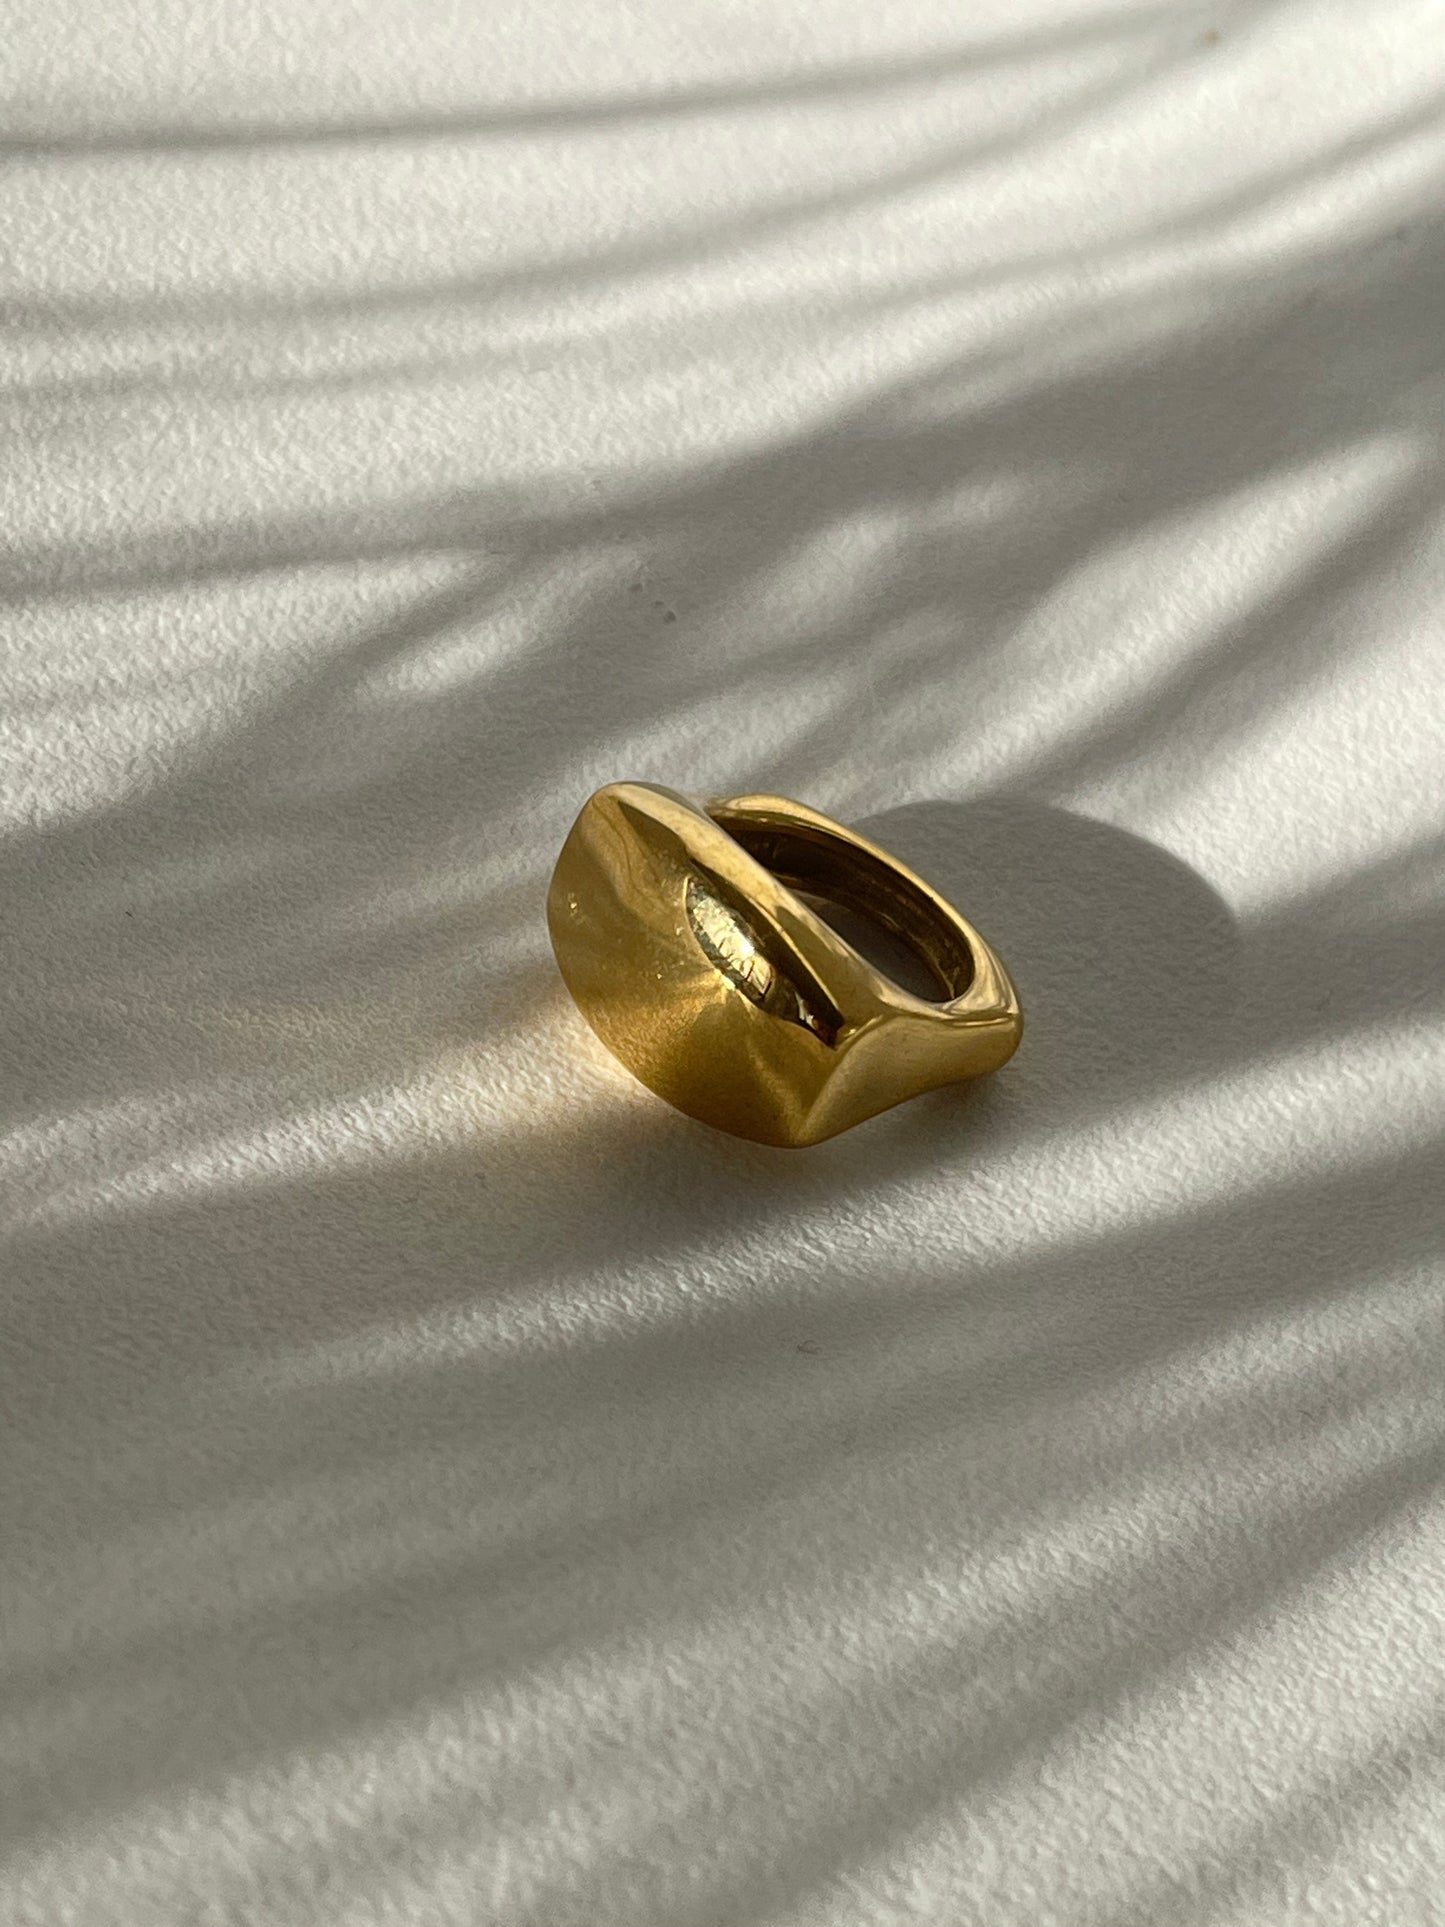 Sawyer Stainless Steel Ring In 18k Gold Plated